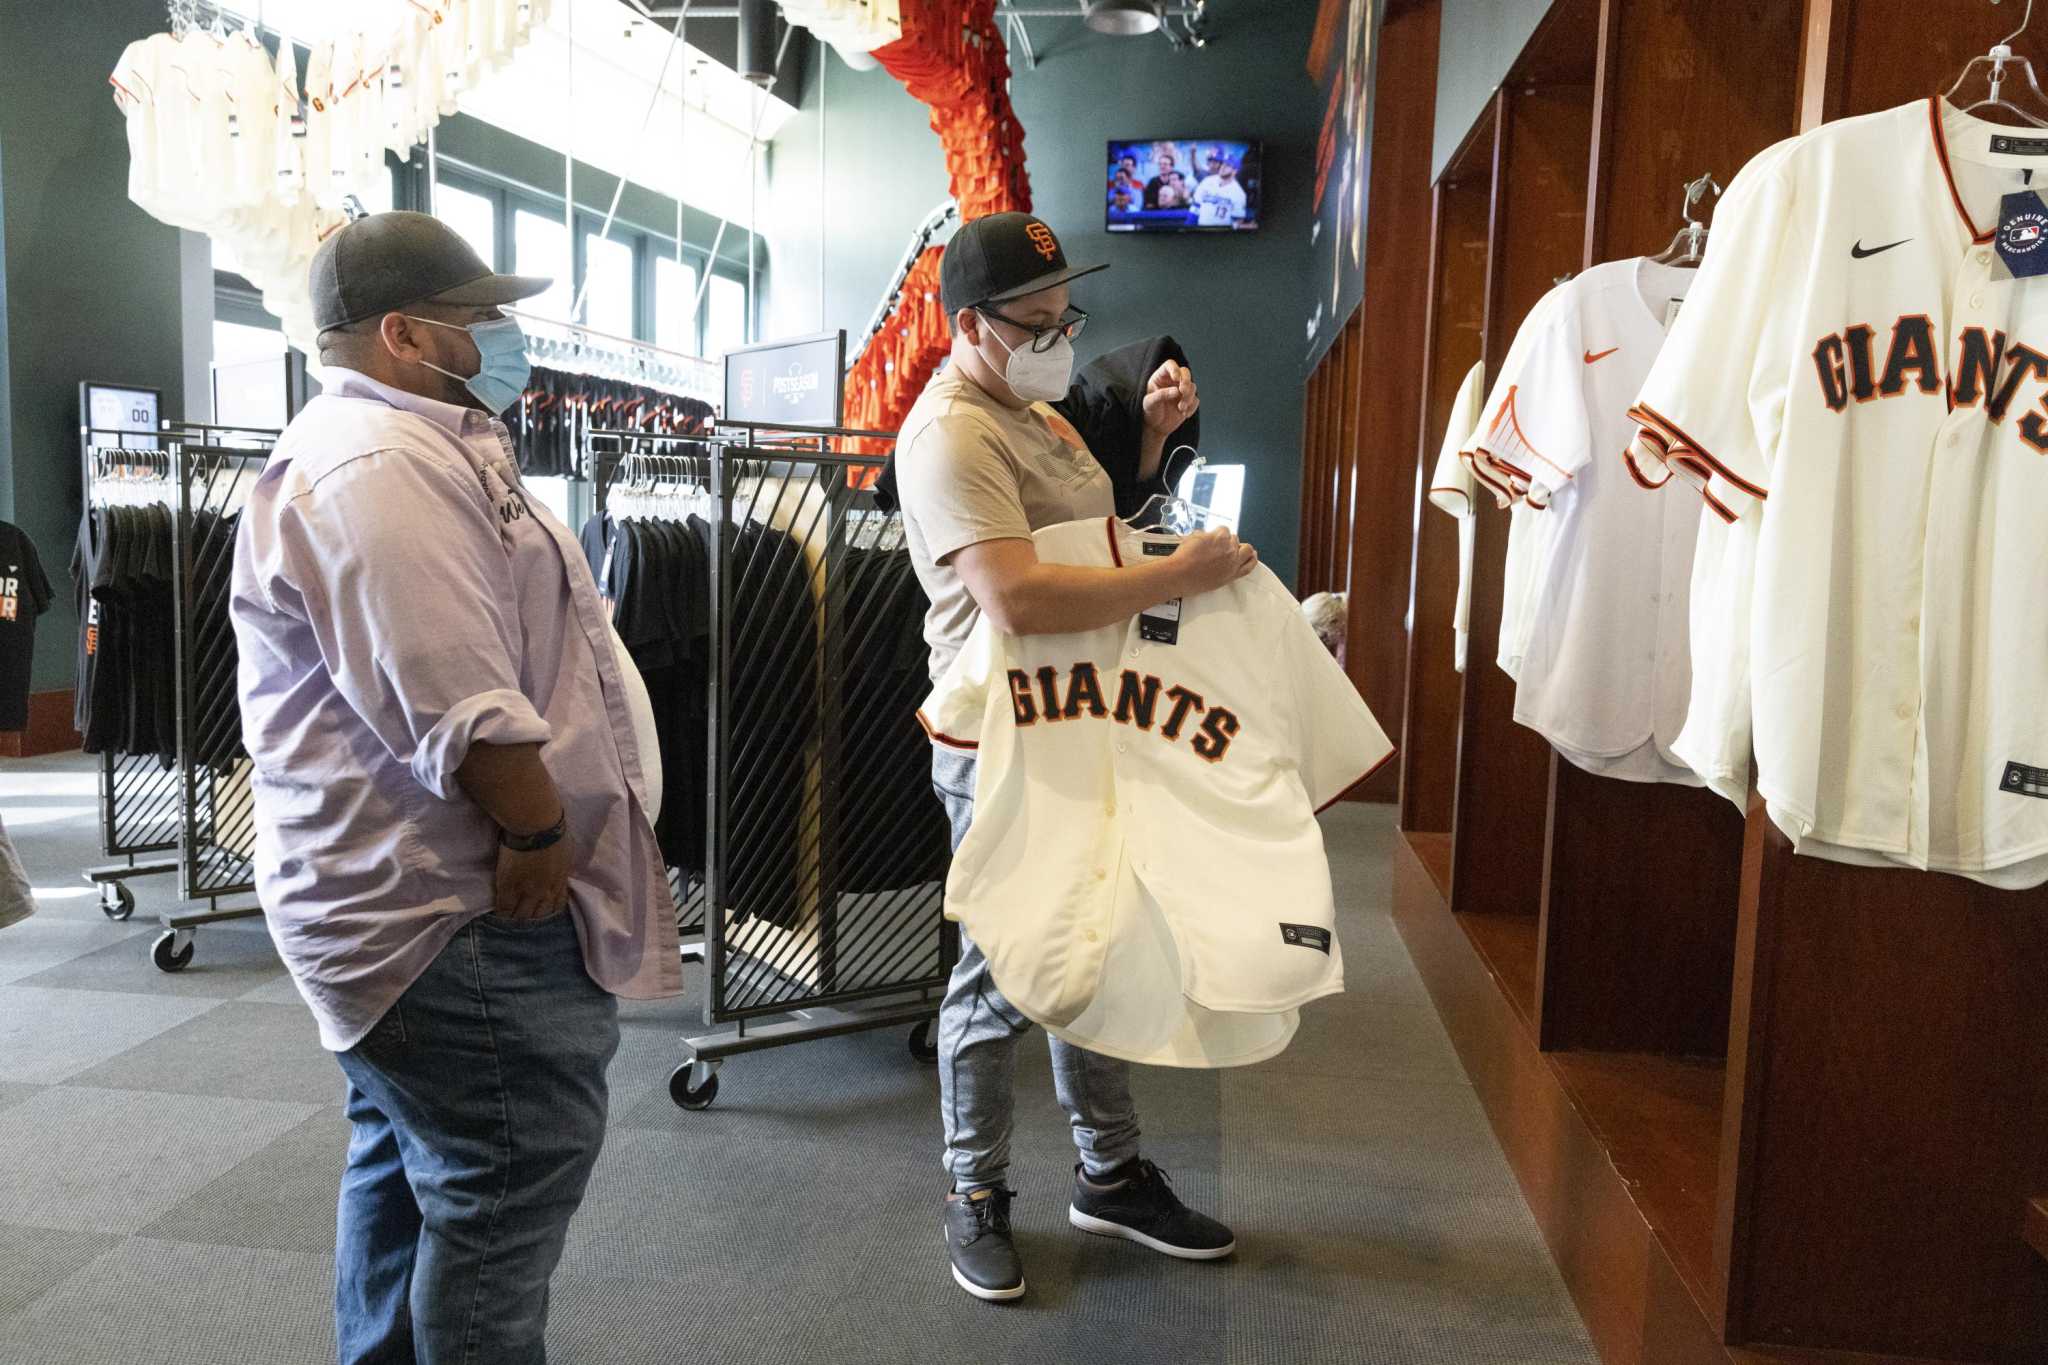 Gabe Kapler expects all SF Giants players to wear Pride uniforms - Sports  Illustrated San Francisco Giants News, Analysis and More